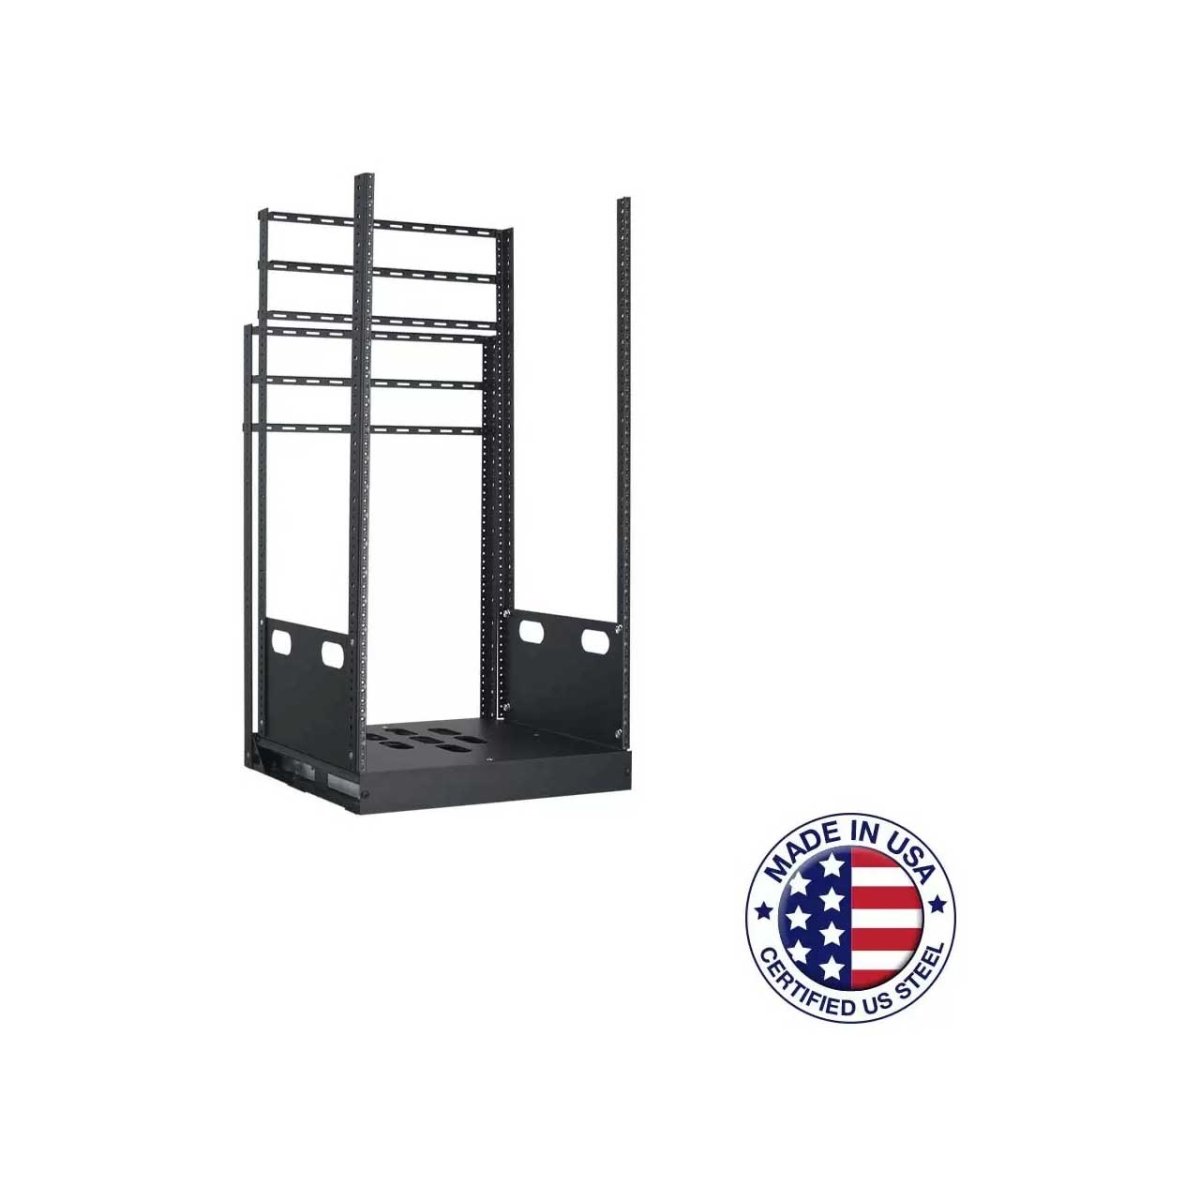 Picture of Lowell Manufacturing LMC-LPTR4-2123 LPTR4-2123 21RU Pull & Turn Millwork Rack with Four Support Rails - 23 in. Deep